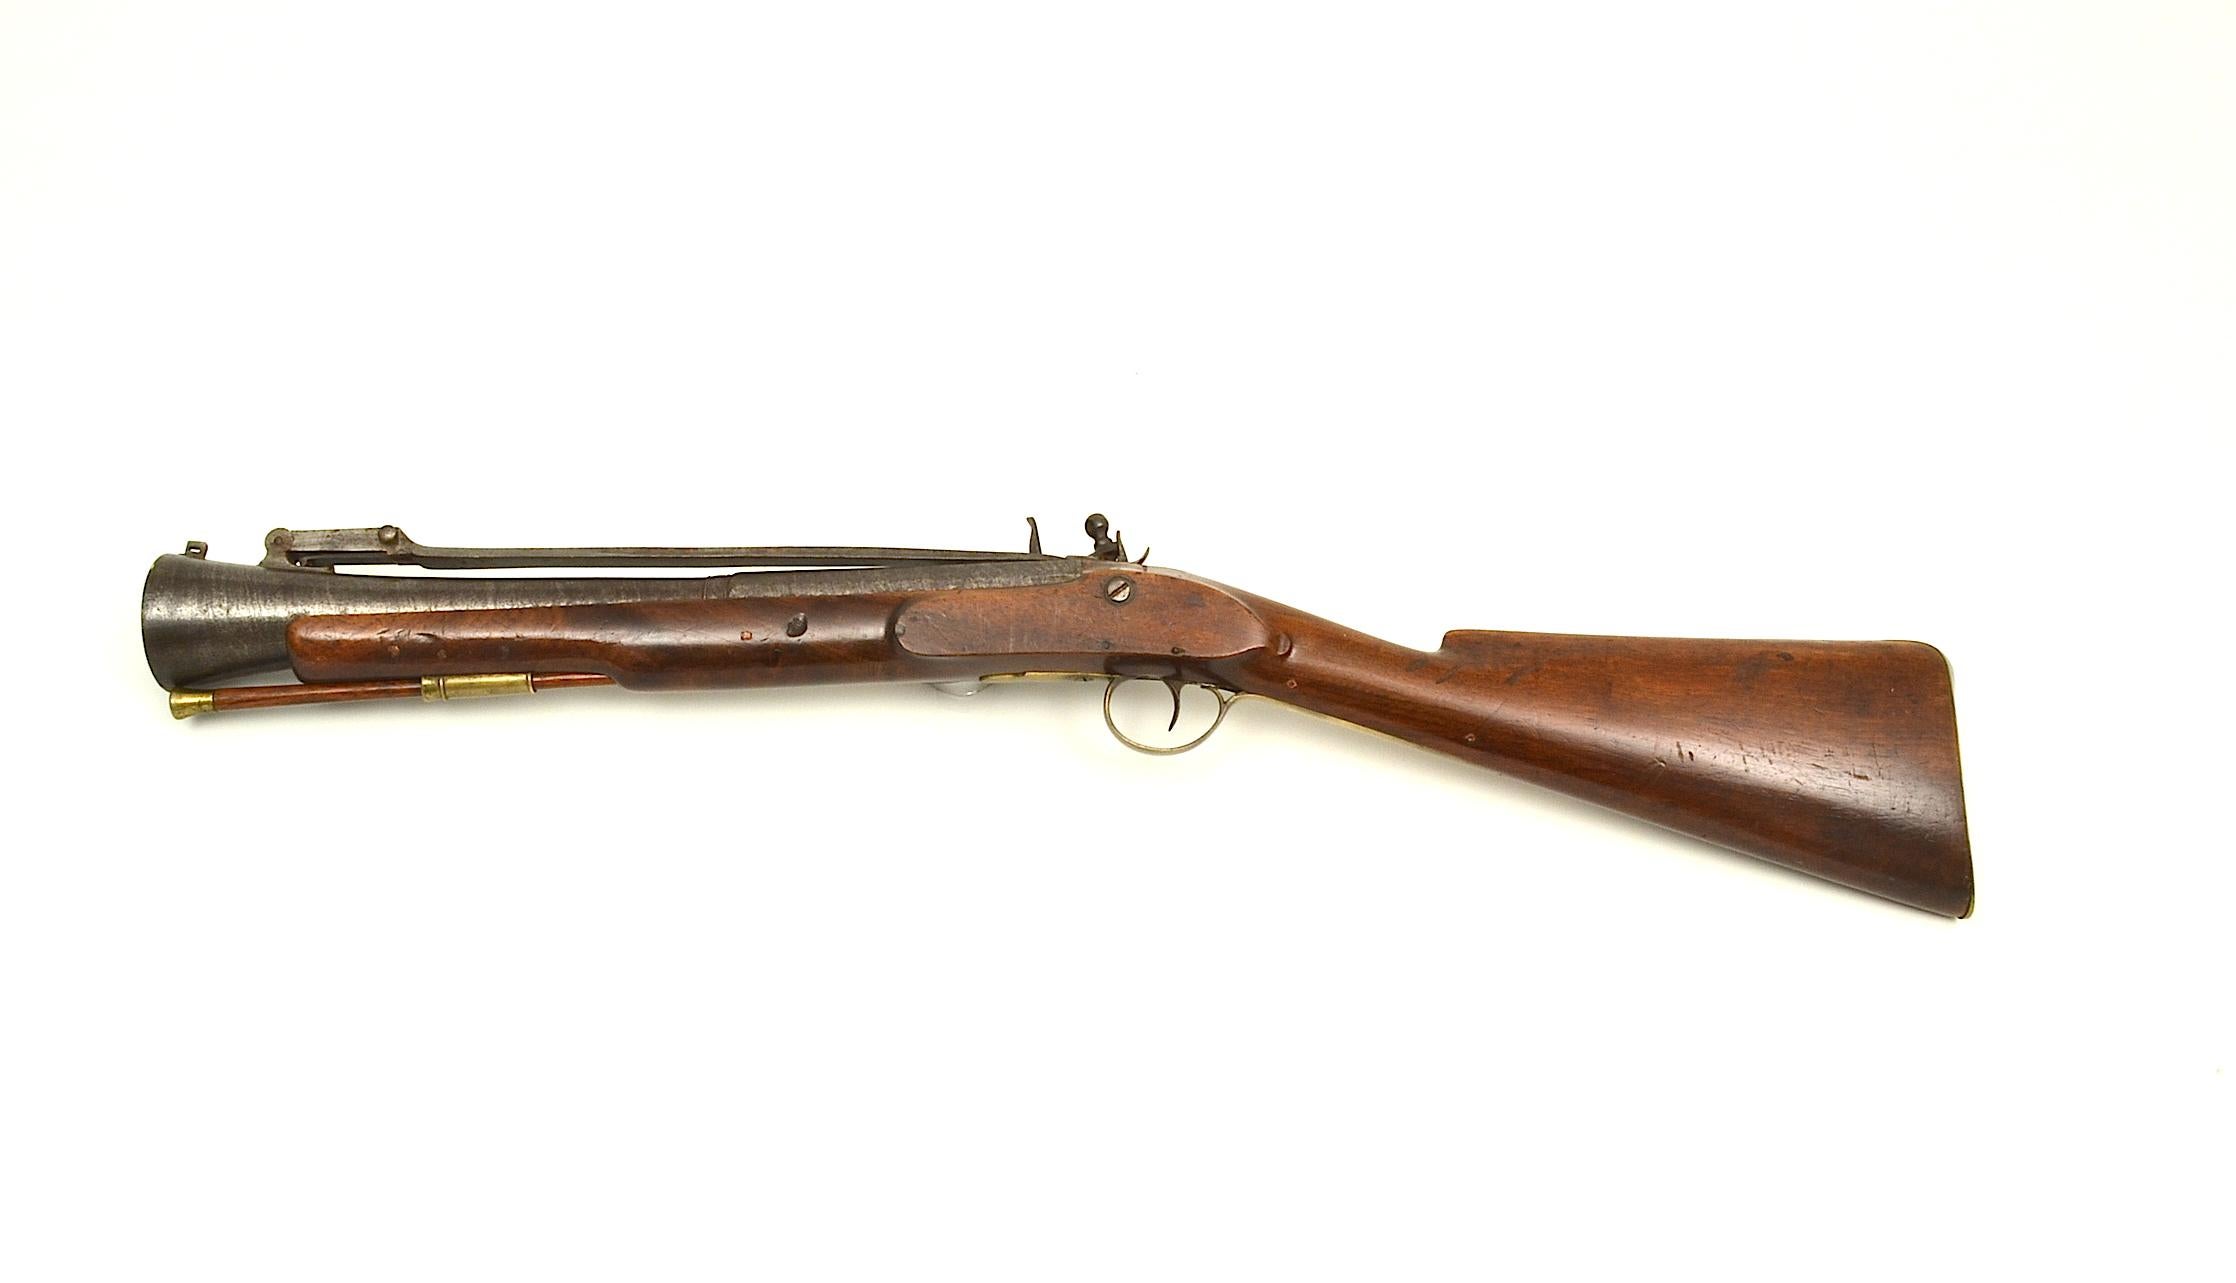 An attractive Irish steel barrelled flintlock blunderbuss with top spring bayonet by Trulock, Dublin, heavy swamped twist barrel with octagonal breech stamped “Trulock” and with Dublin registration number, the 14” spring bayonet released by thumb